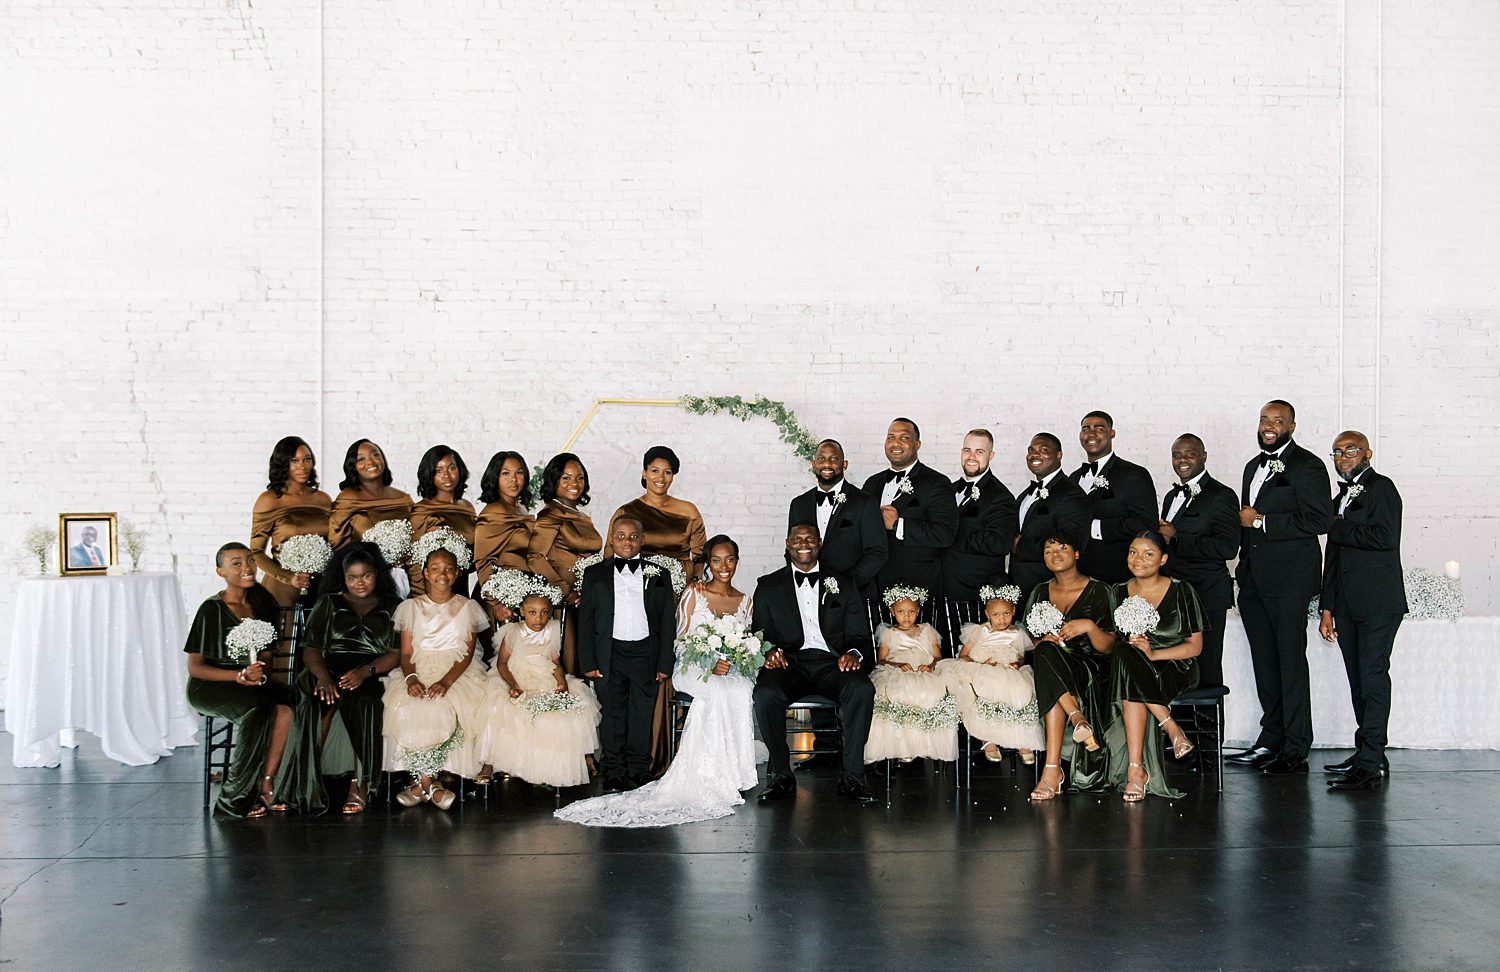 bride and groom pose with wedding party in green and gold gowns, classic black tuxes, and white florals at Haus 820